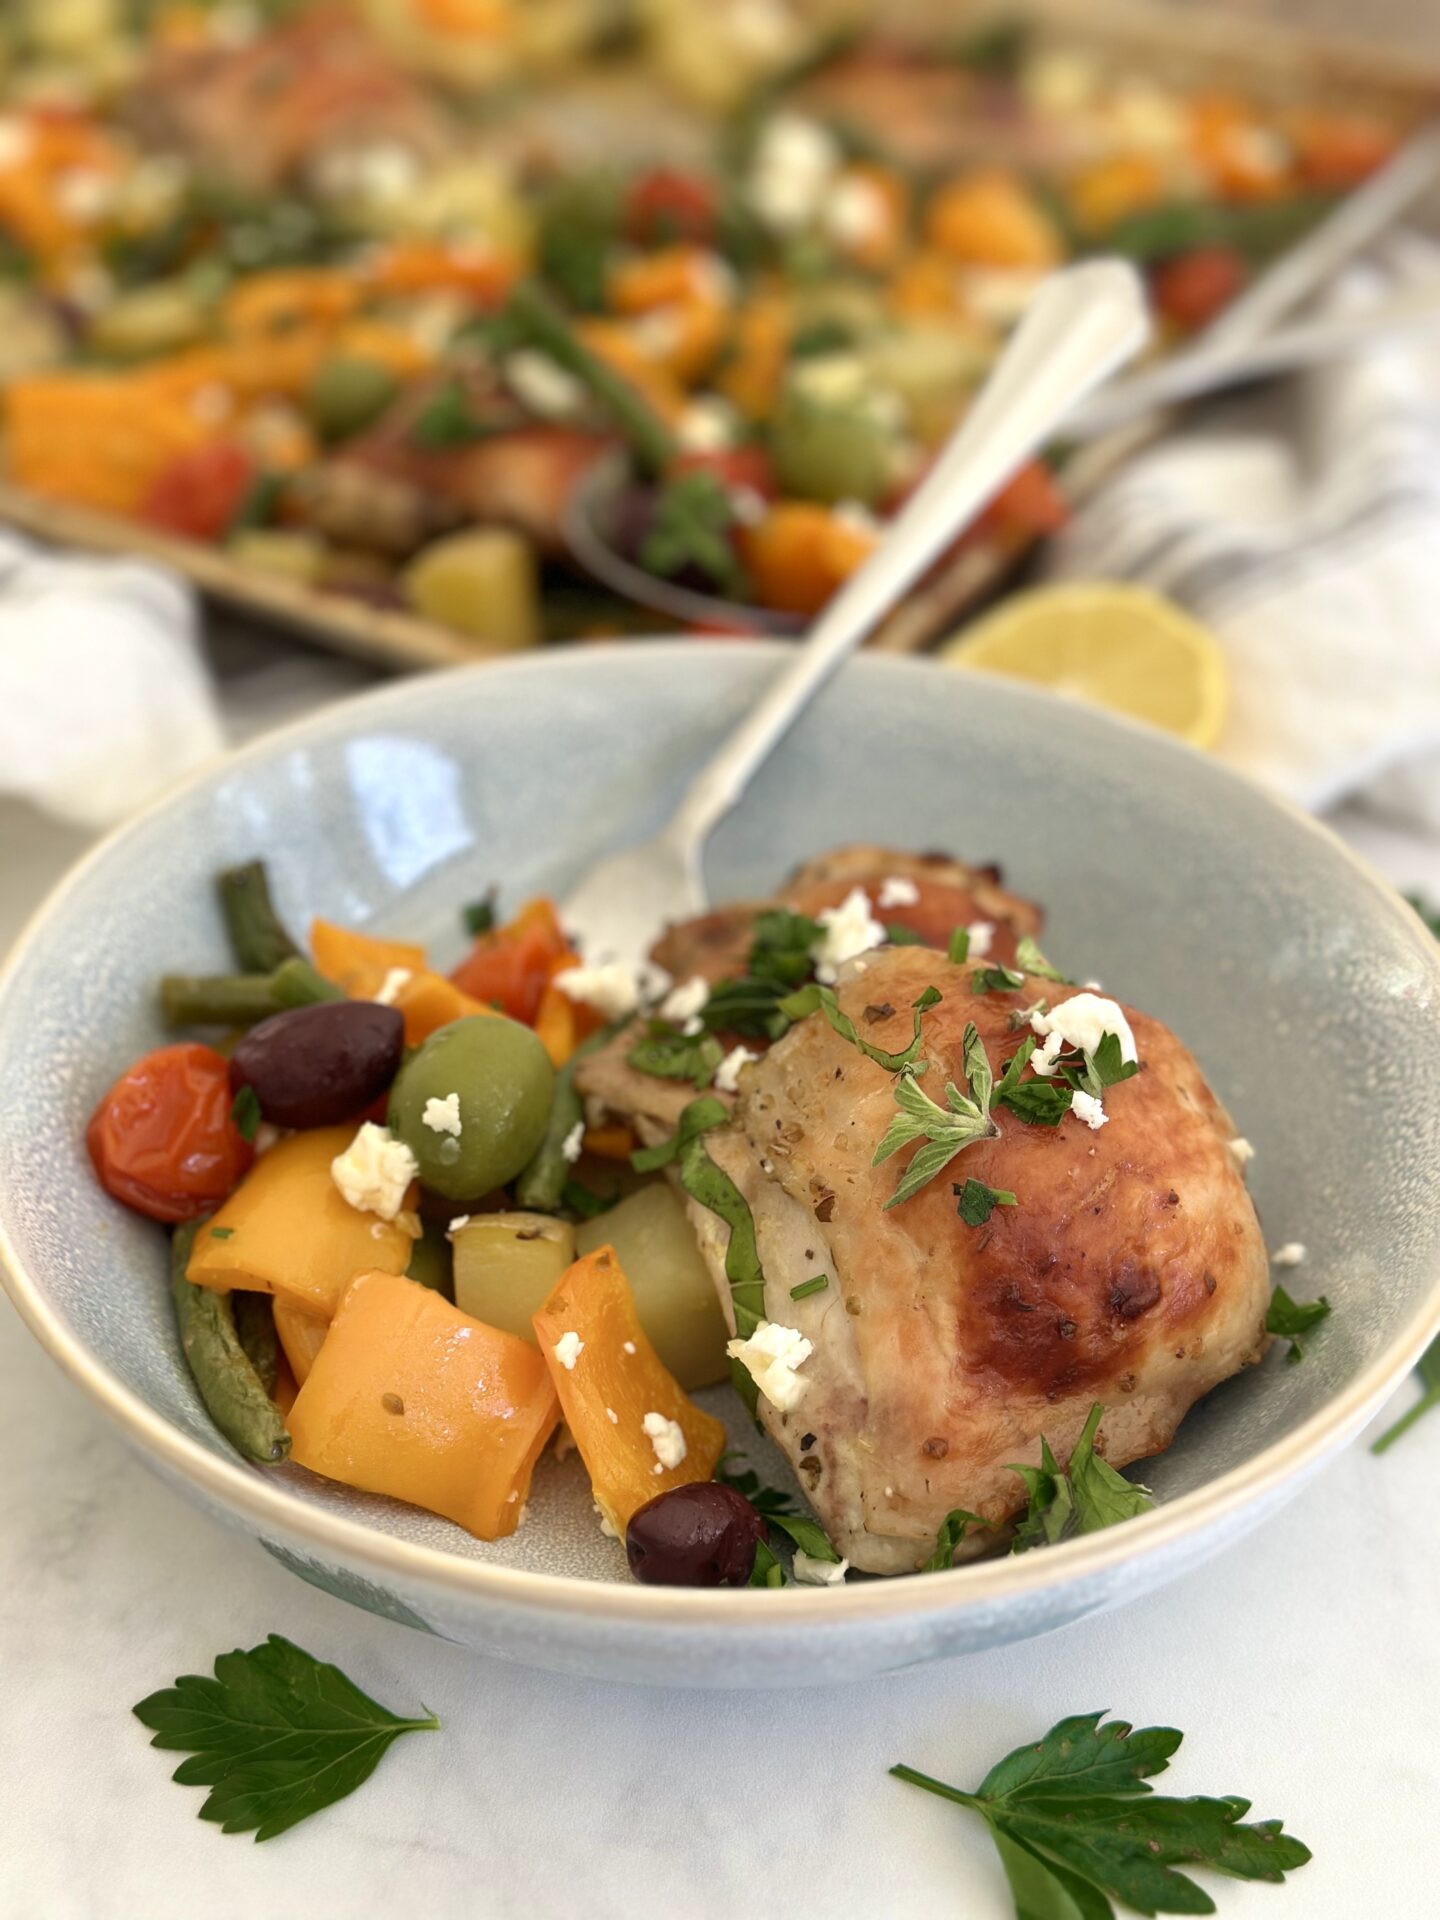 A bowl of Greek Chicken Sheet Pan Dinner is seen with golden chicken thighs, roasted vegetables, olives and feta cheese.  The sheet pan with the rest of the dinner is seen in the background.